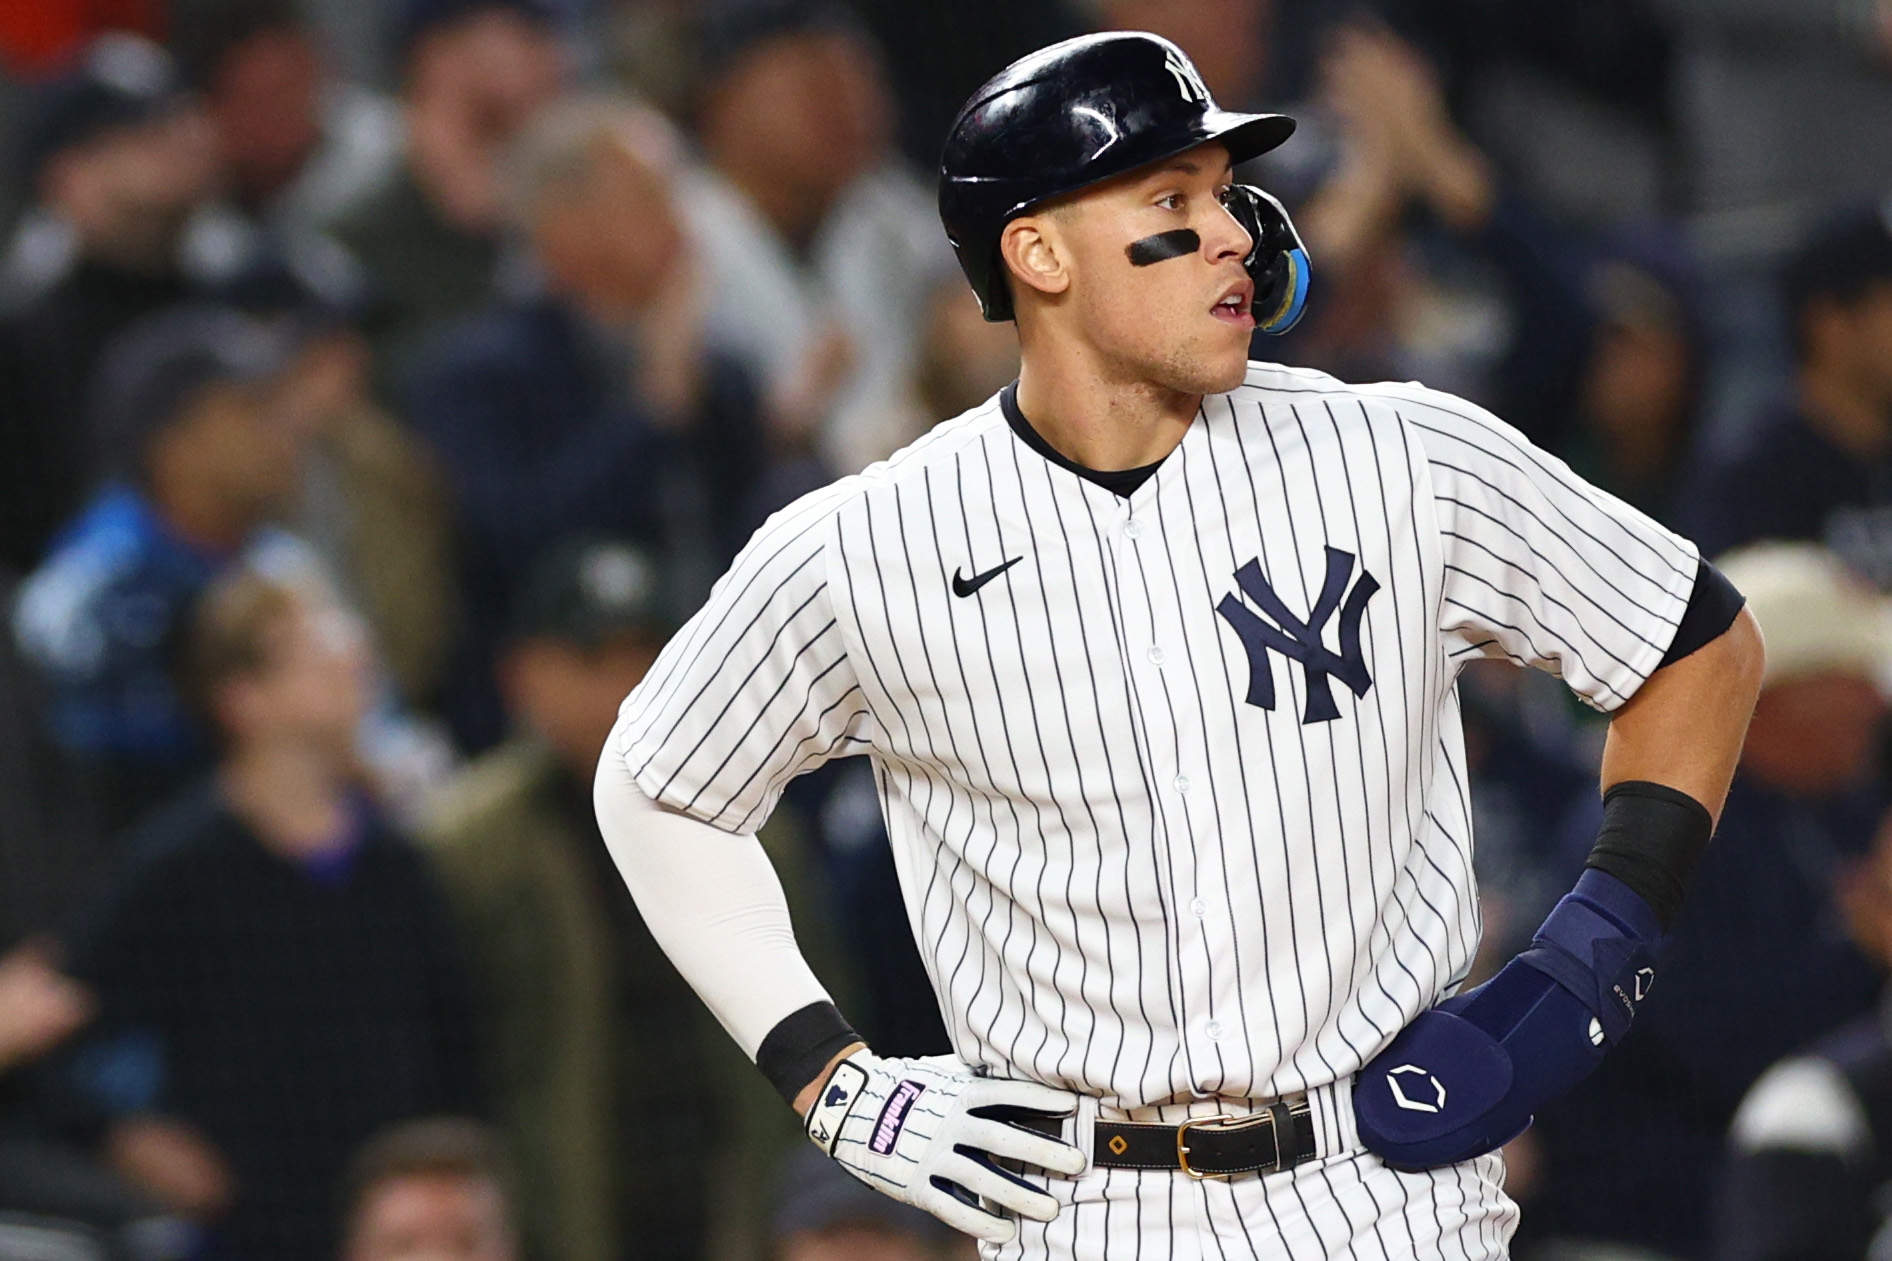 Aaron Judge #99 of the New York Yankees looks on after reaching third base in the second inning against the Houston Astros in game four of the American League Championship Series at Yankee Stadium on October 23, 2022 in the Bronx borough of New York City.